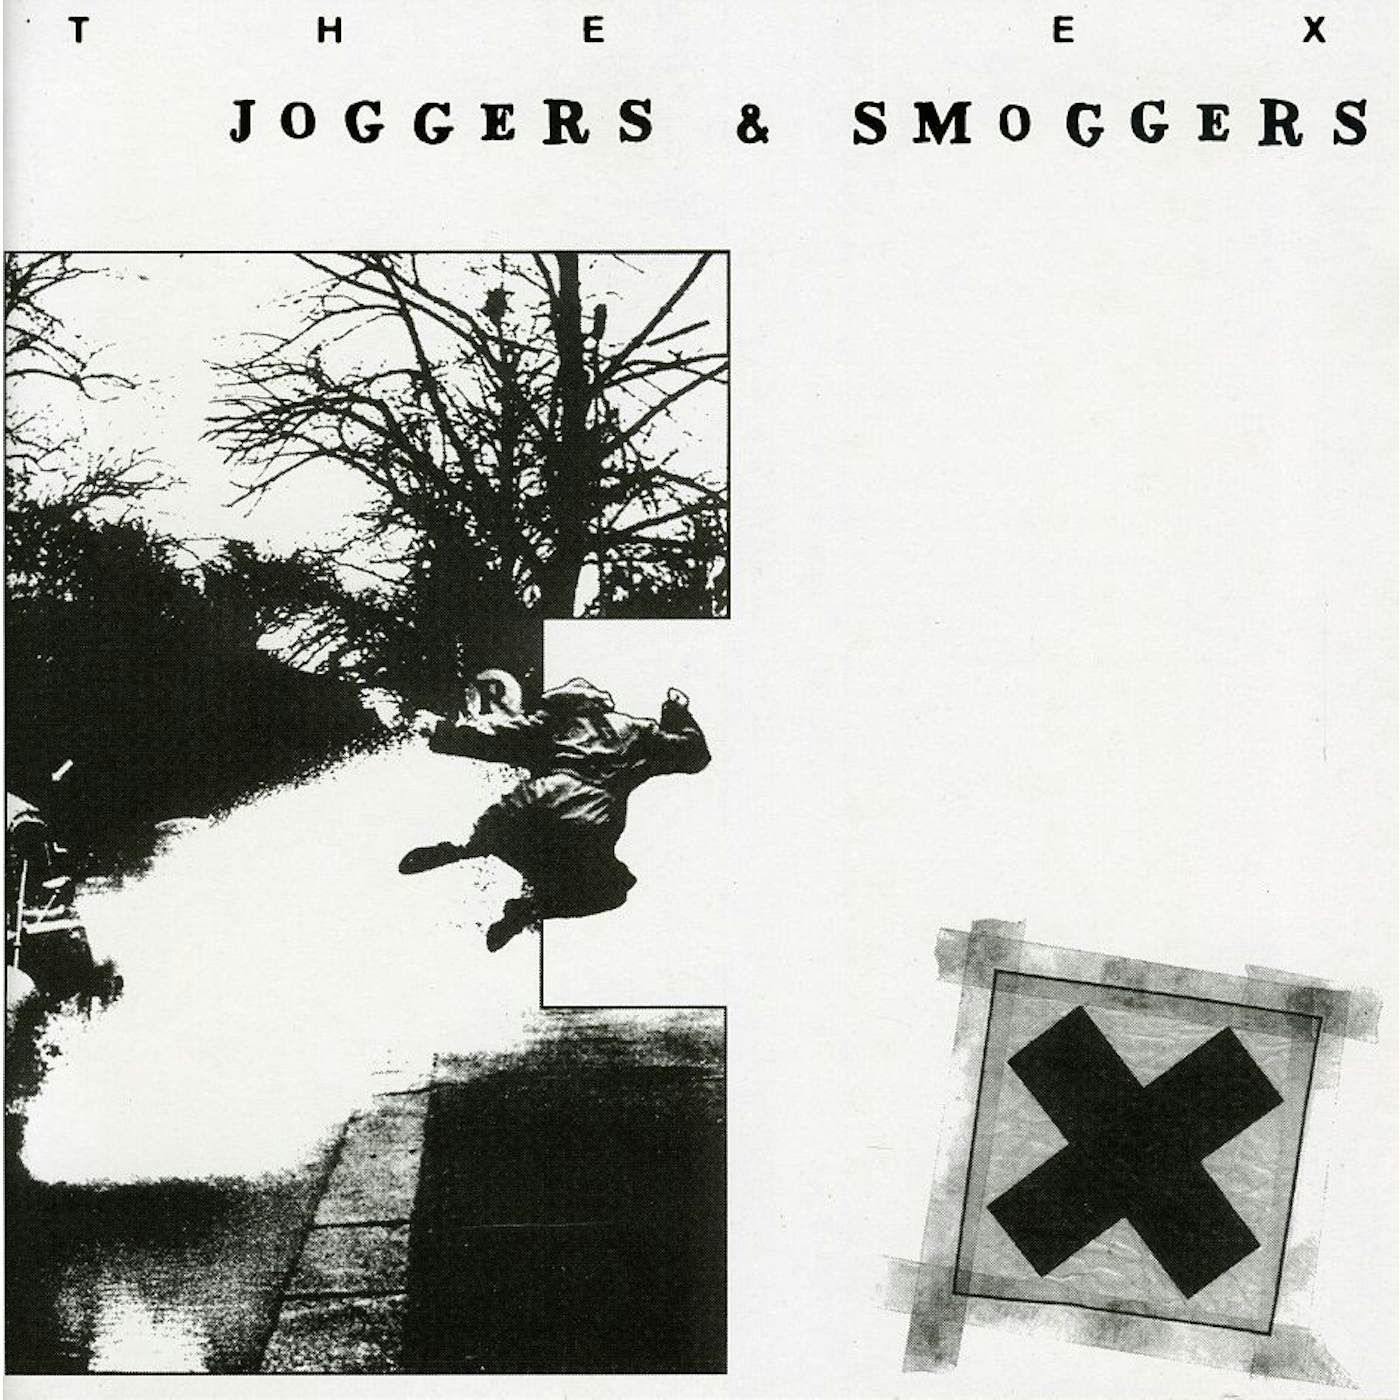 Ex JOGGERS & SMOGGERS CD